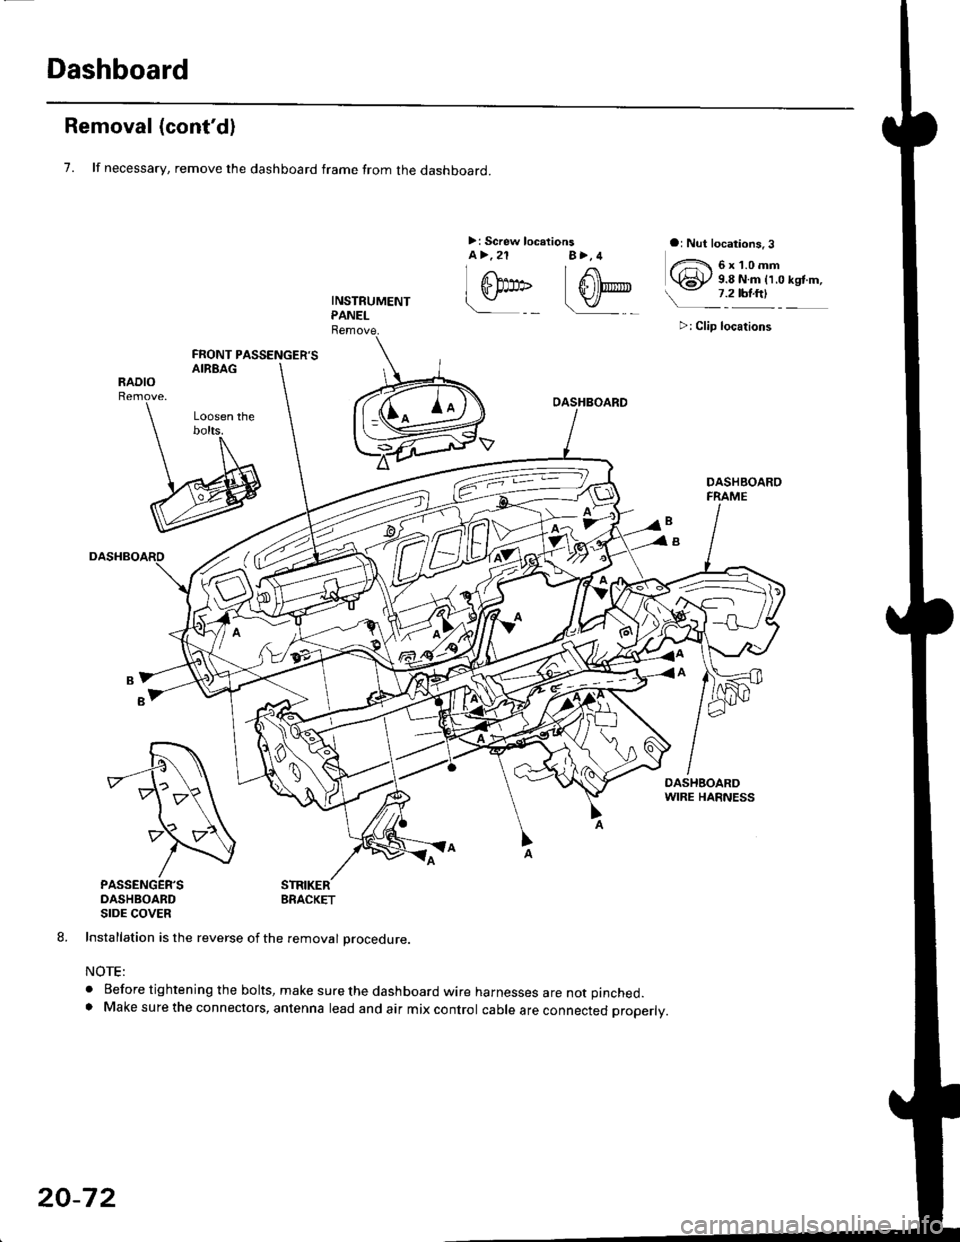 HONDA CIVIC 2000 6.G Workshop Manual Dashboard
Removal (contd)
7. lf necessary, remove the dashboard frame from the dashboard.
>: Screw localionsa>,21 B>,4a: Nut locations, 3
>: Clip locations
l^1./\
I Shl: OlbtvY/l\-]1
ra 6 x 1.0 m